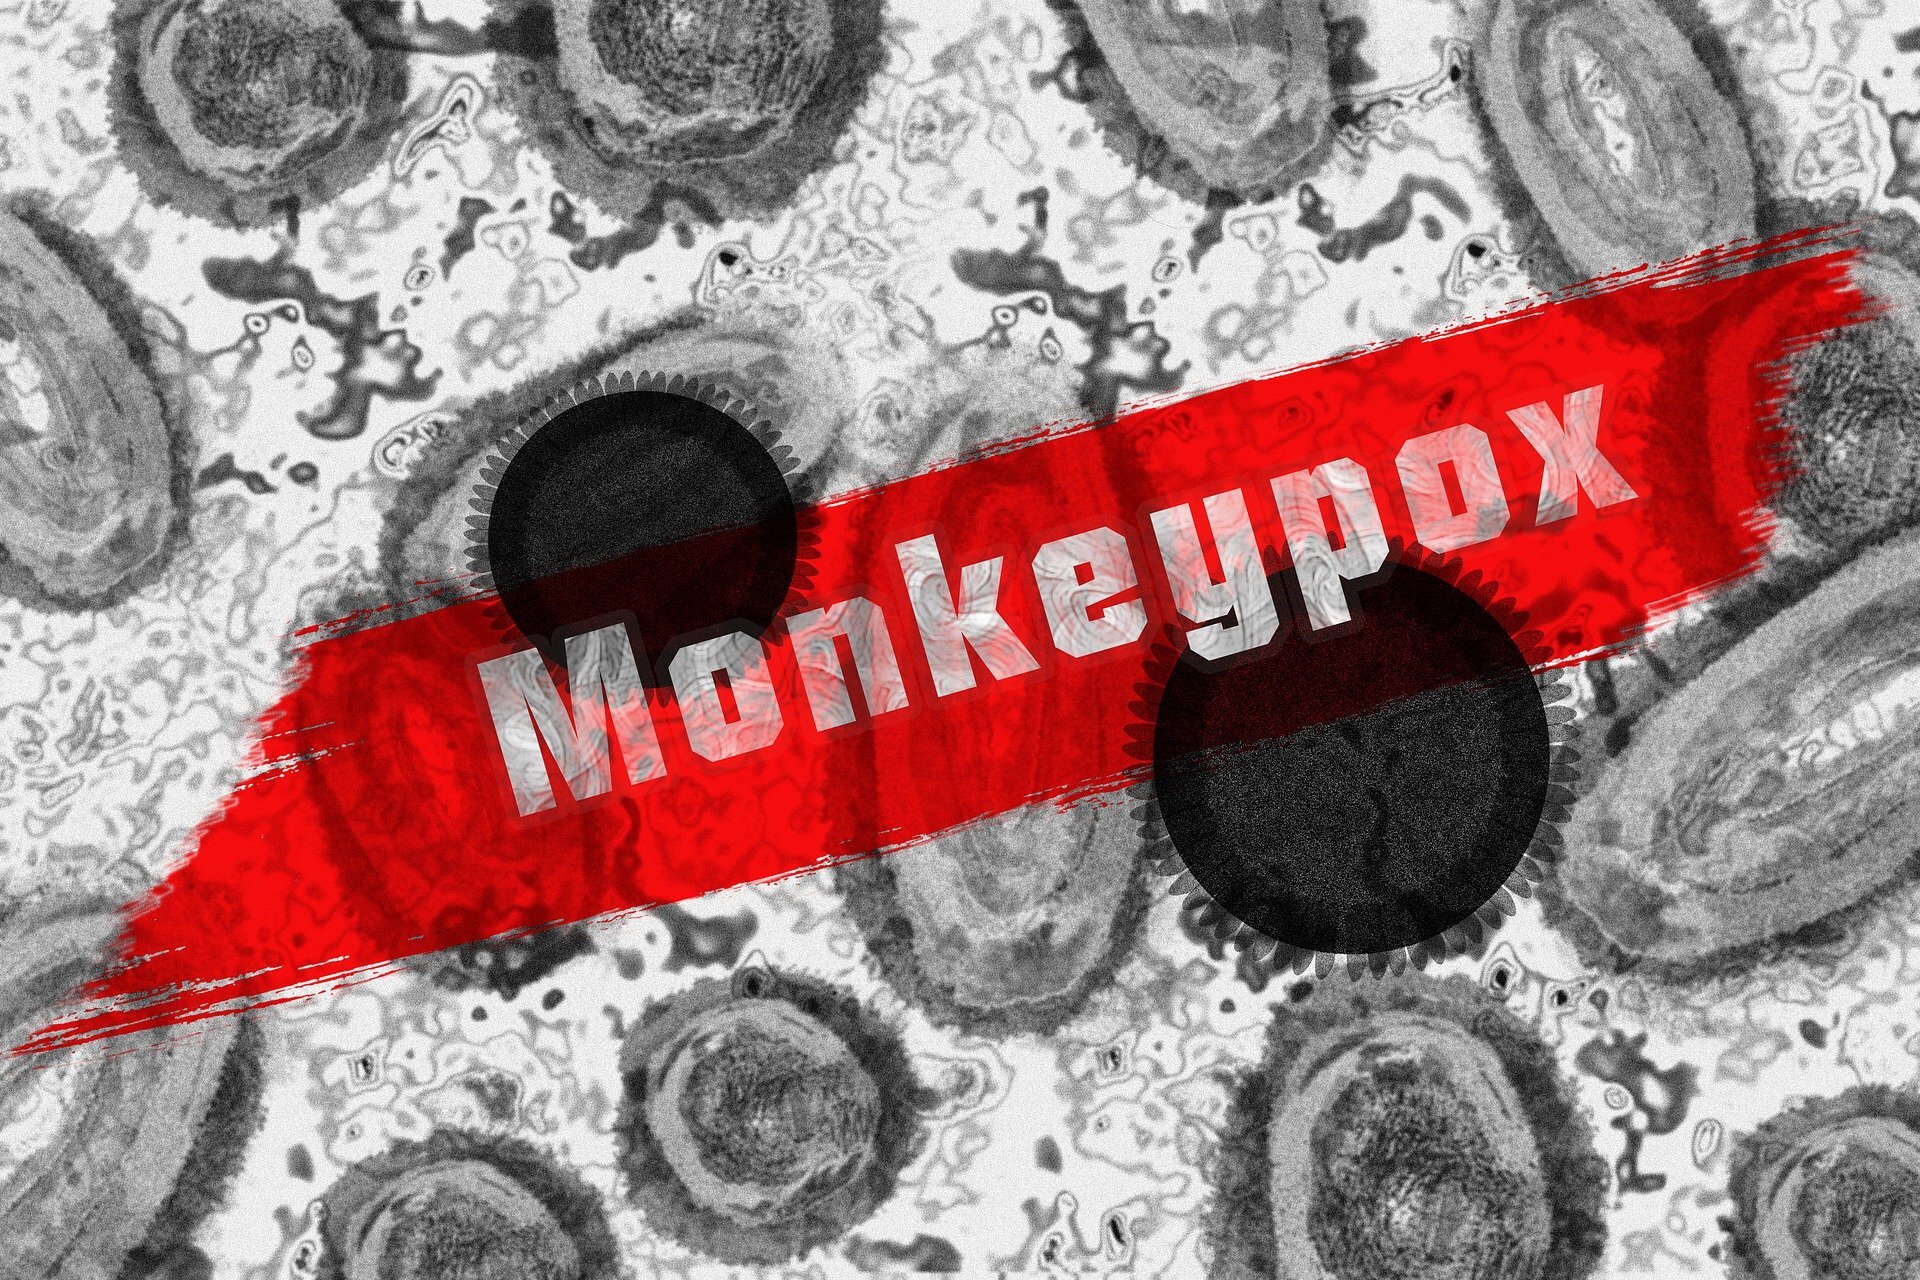 Monkeypox is now a national public health emergency in the US. An epidemiologist explains what this means